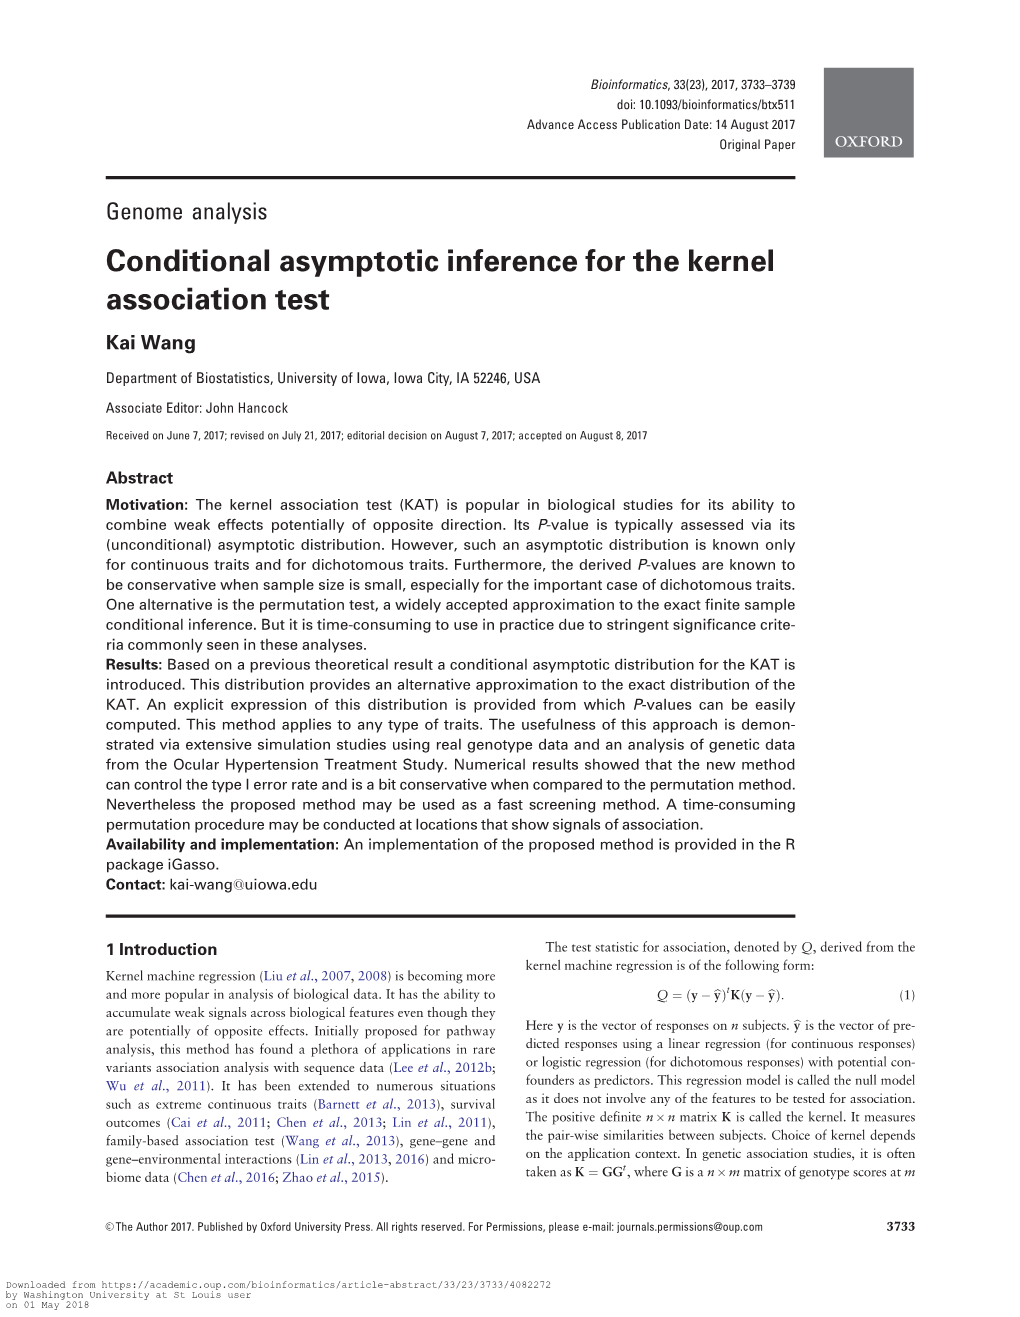 Conditional Asymptotic Inference for the Kernel Association Test Kai Wang